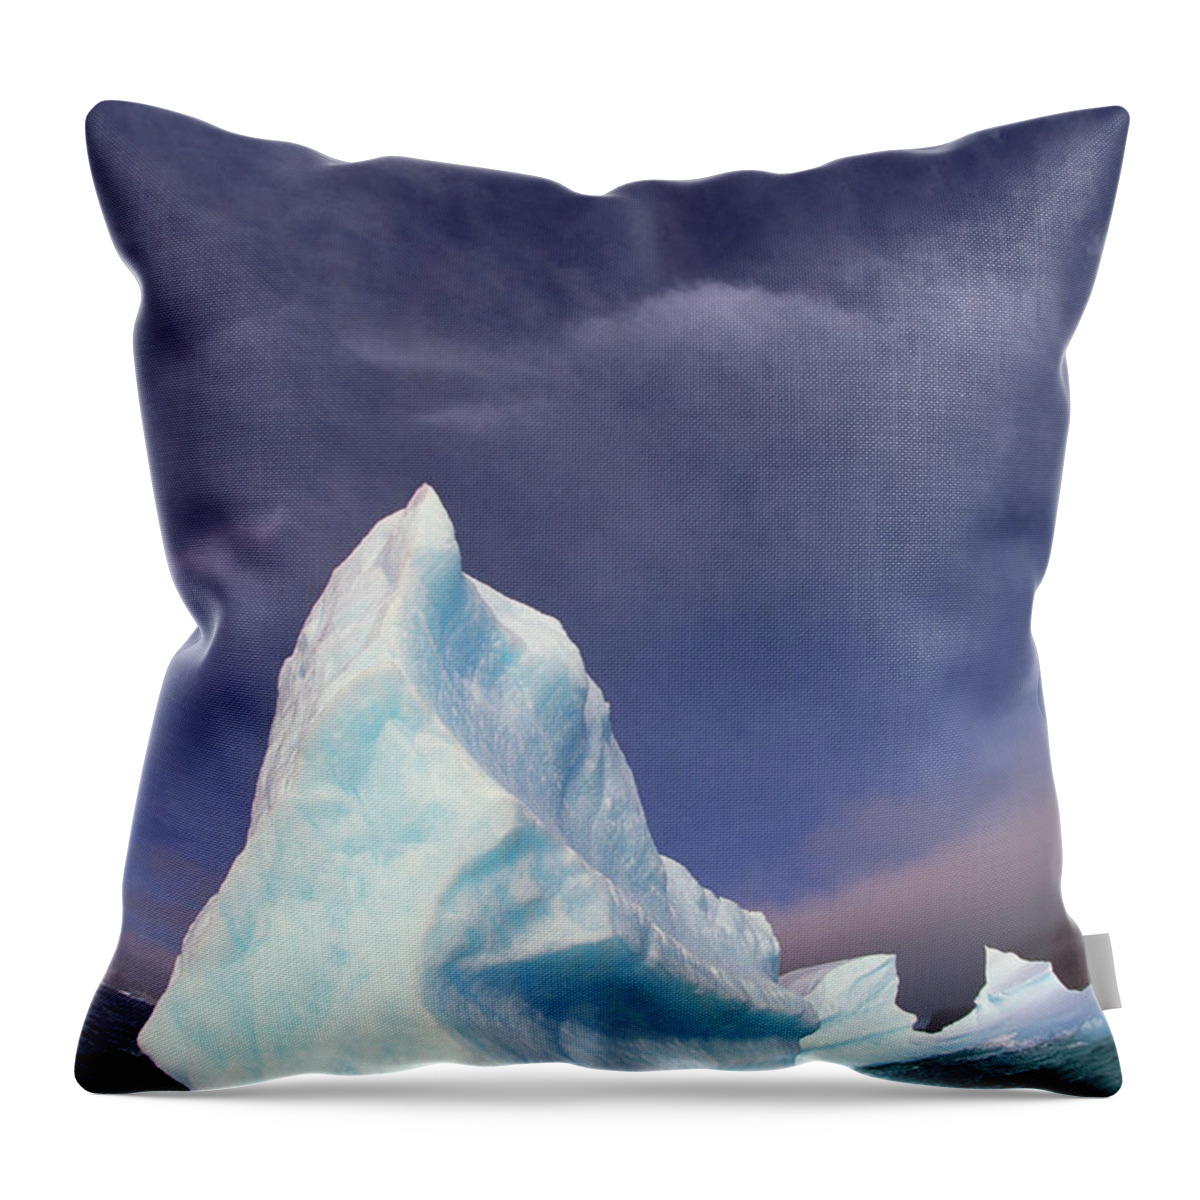 00260470 Throw Pillow featuring the photograph Iceberg Adrift Near South Orkney by Colin Monteath